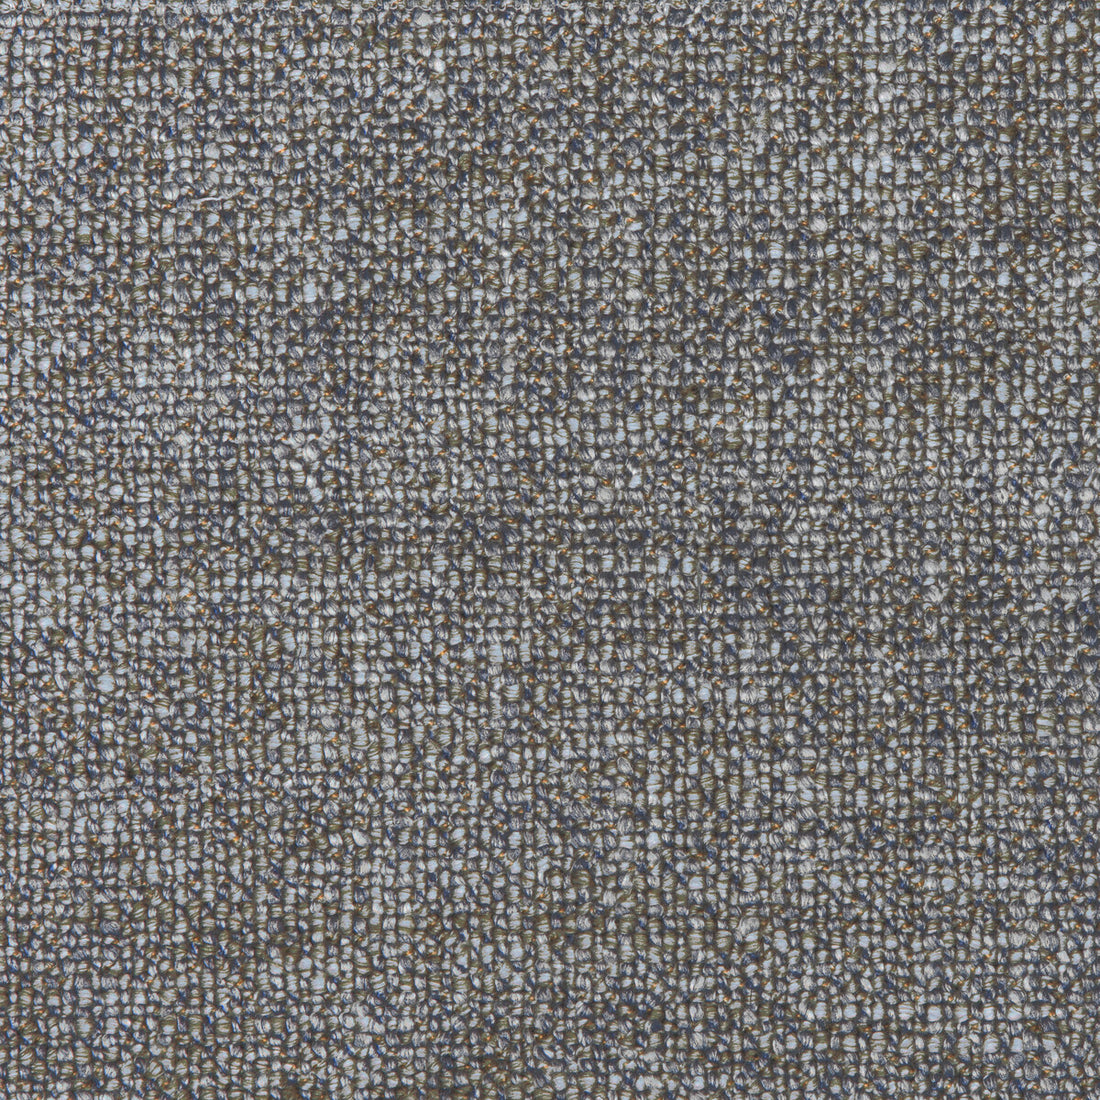 Kravet Couture fabric in 36622-21 color - pattern 36622.21.0 - by Kravet Couture in the Mabley Handler collection